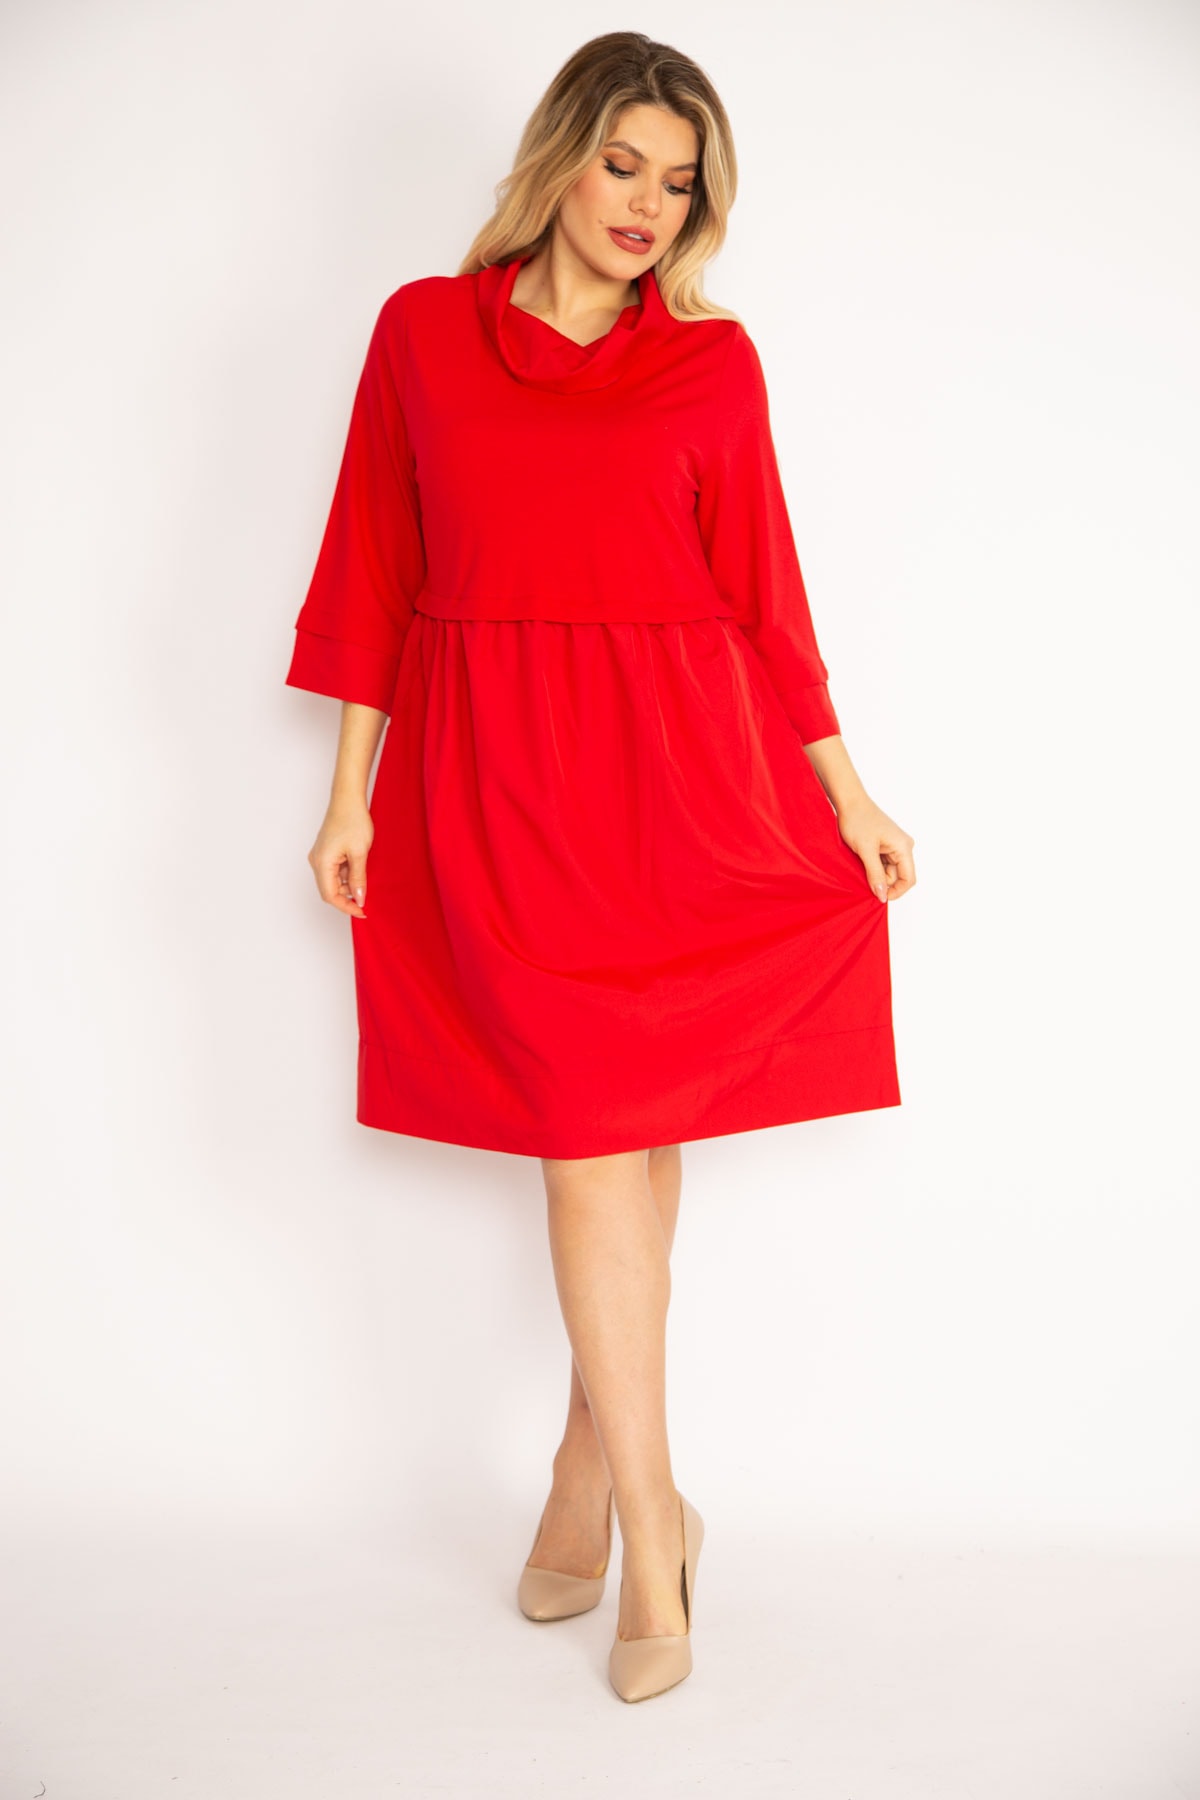 Şans Women's Plus Size Red Stand-Up Collar Skirt Part Collar And Sleeves Rolled Up, Fabric Dress